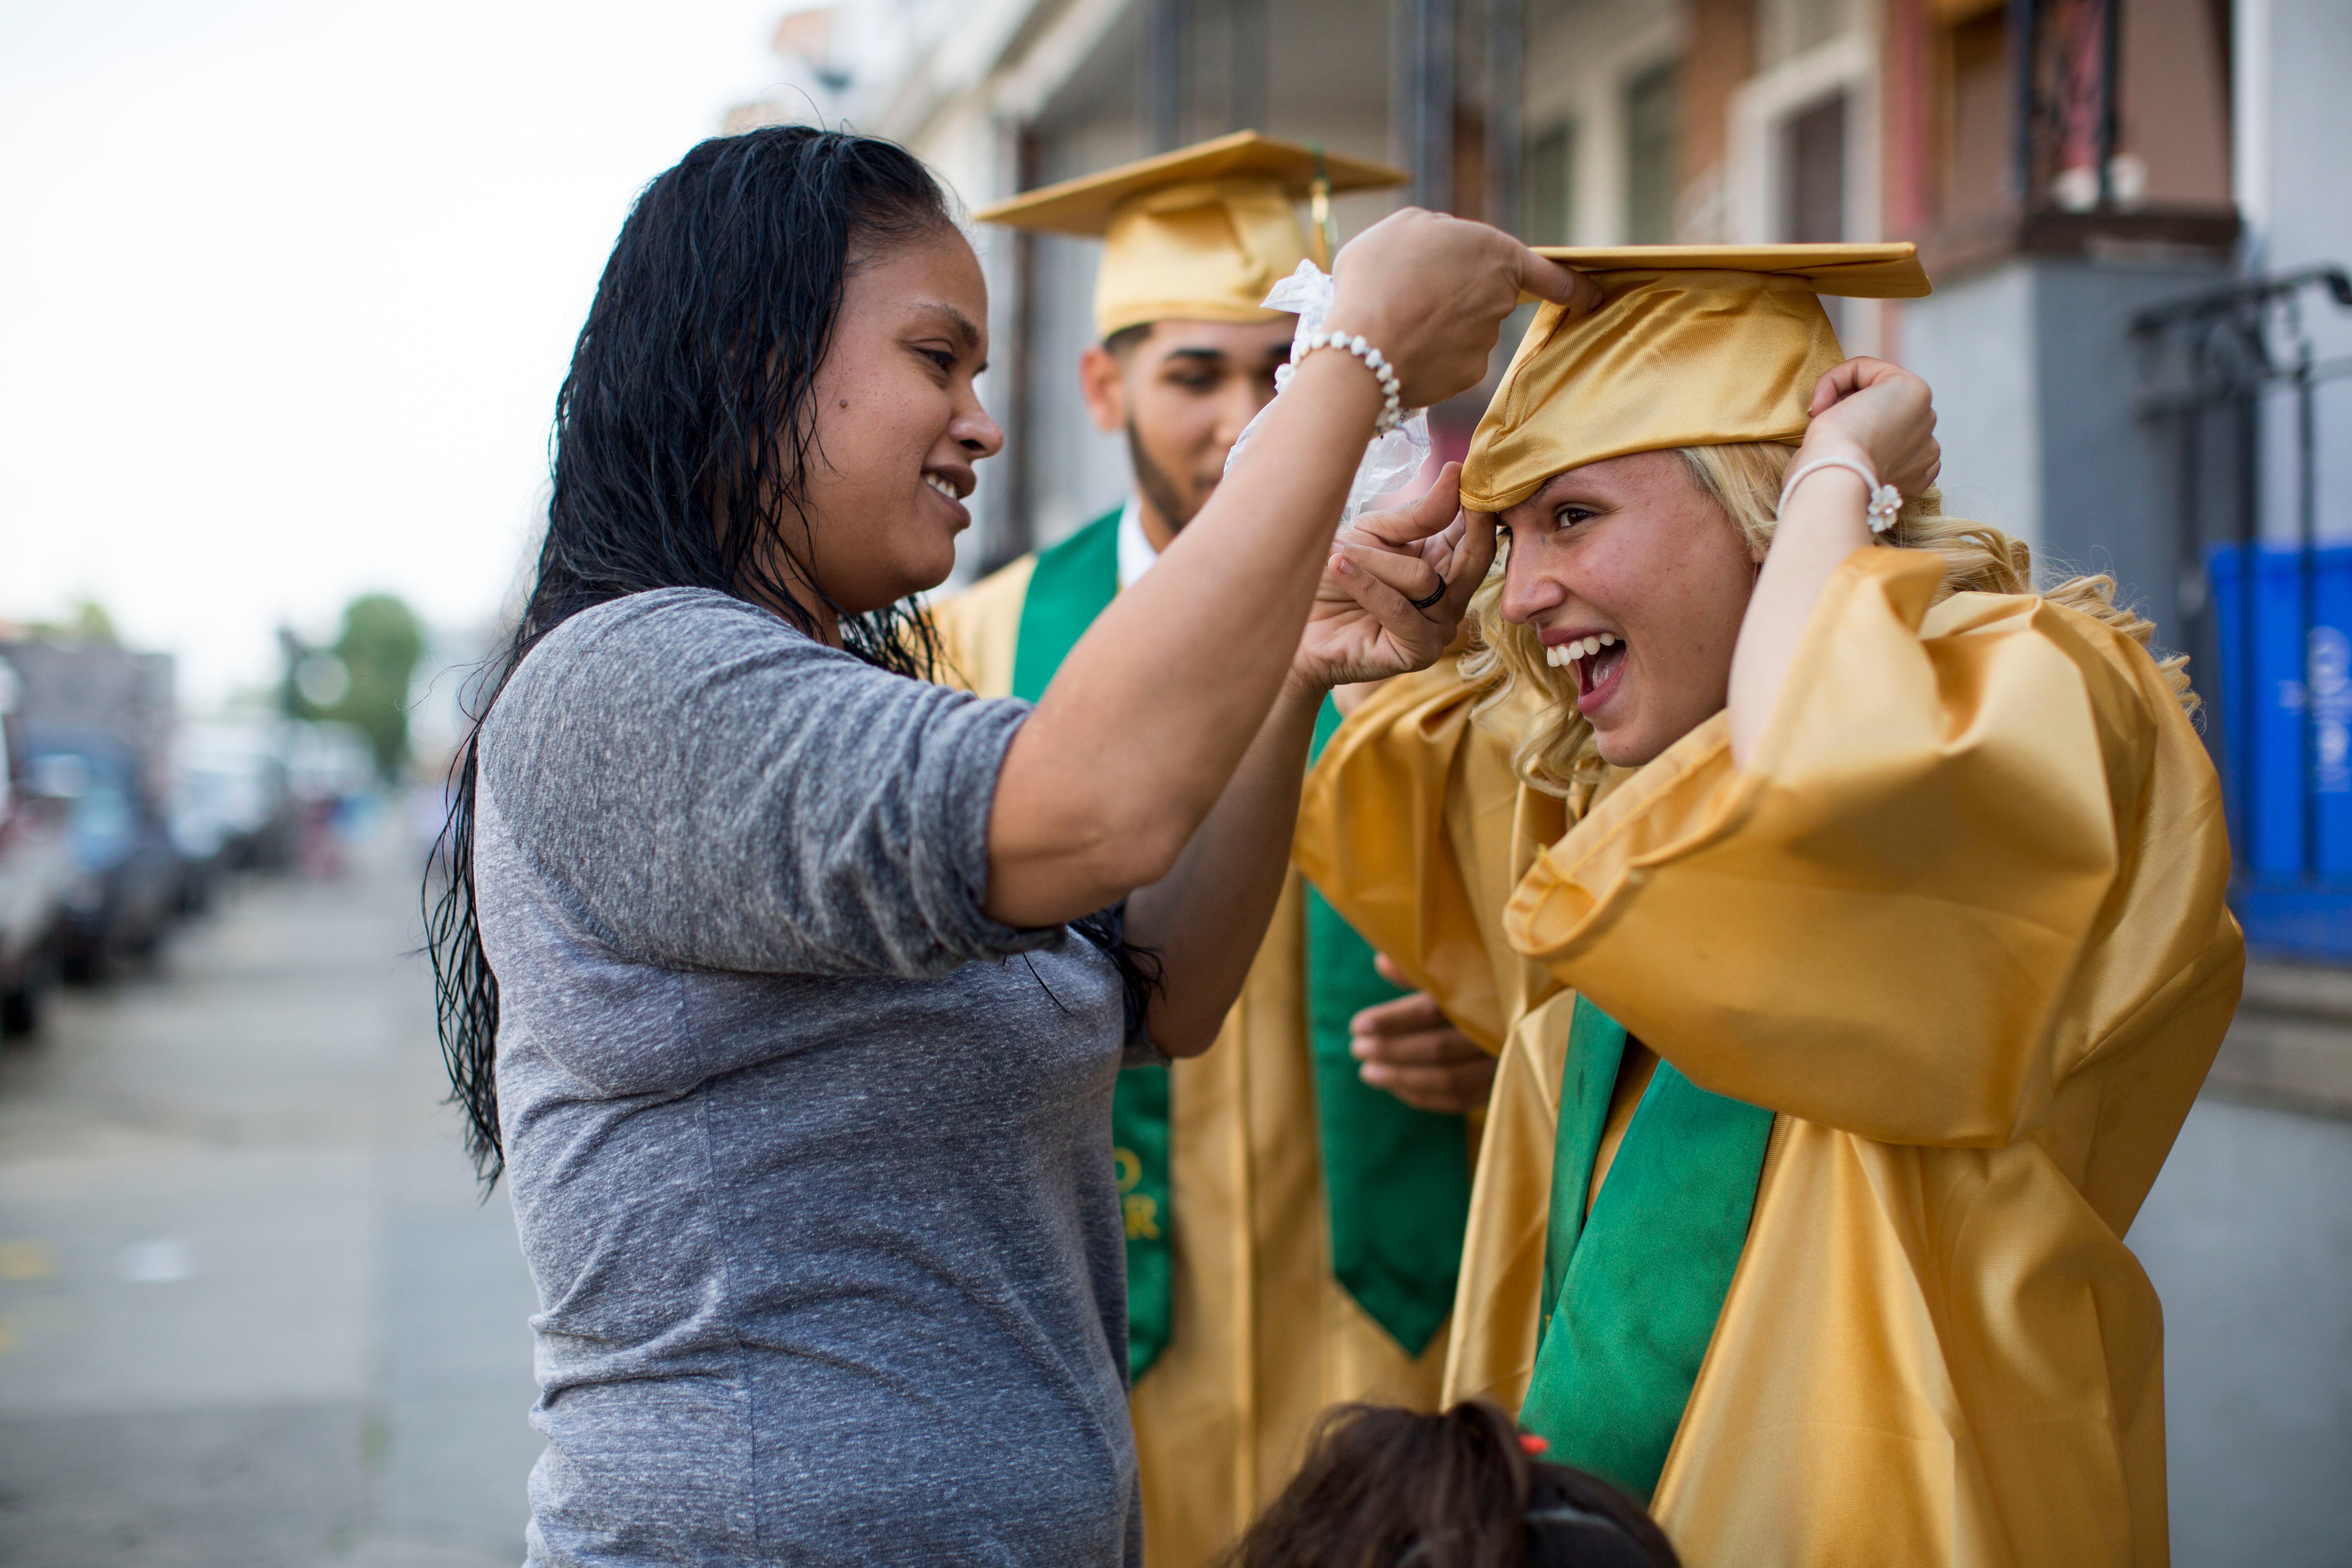 Neverlyn, who dropped out of Thomas A. Edison High School 20 years ago, helps Savannah fit her graduation cap. (Jessica Kourkounis/For Keystone Crossroads)